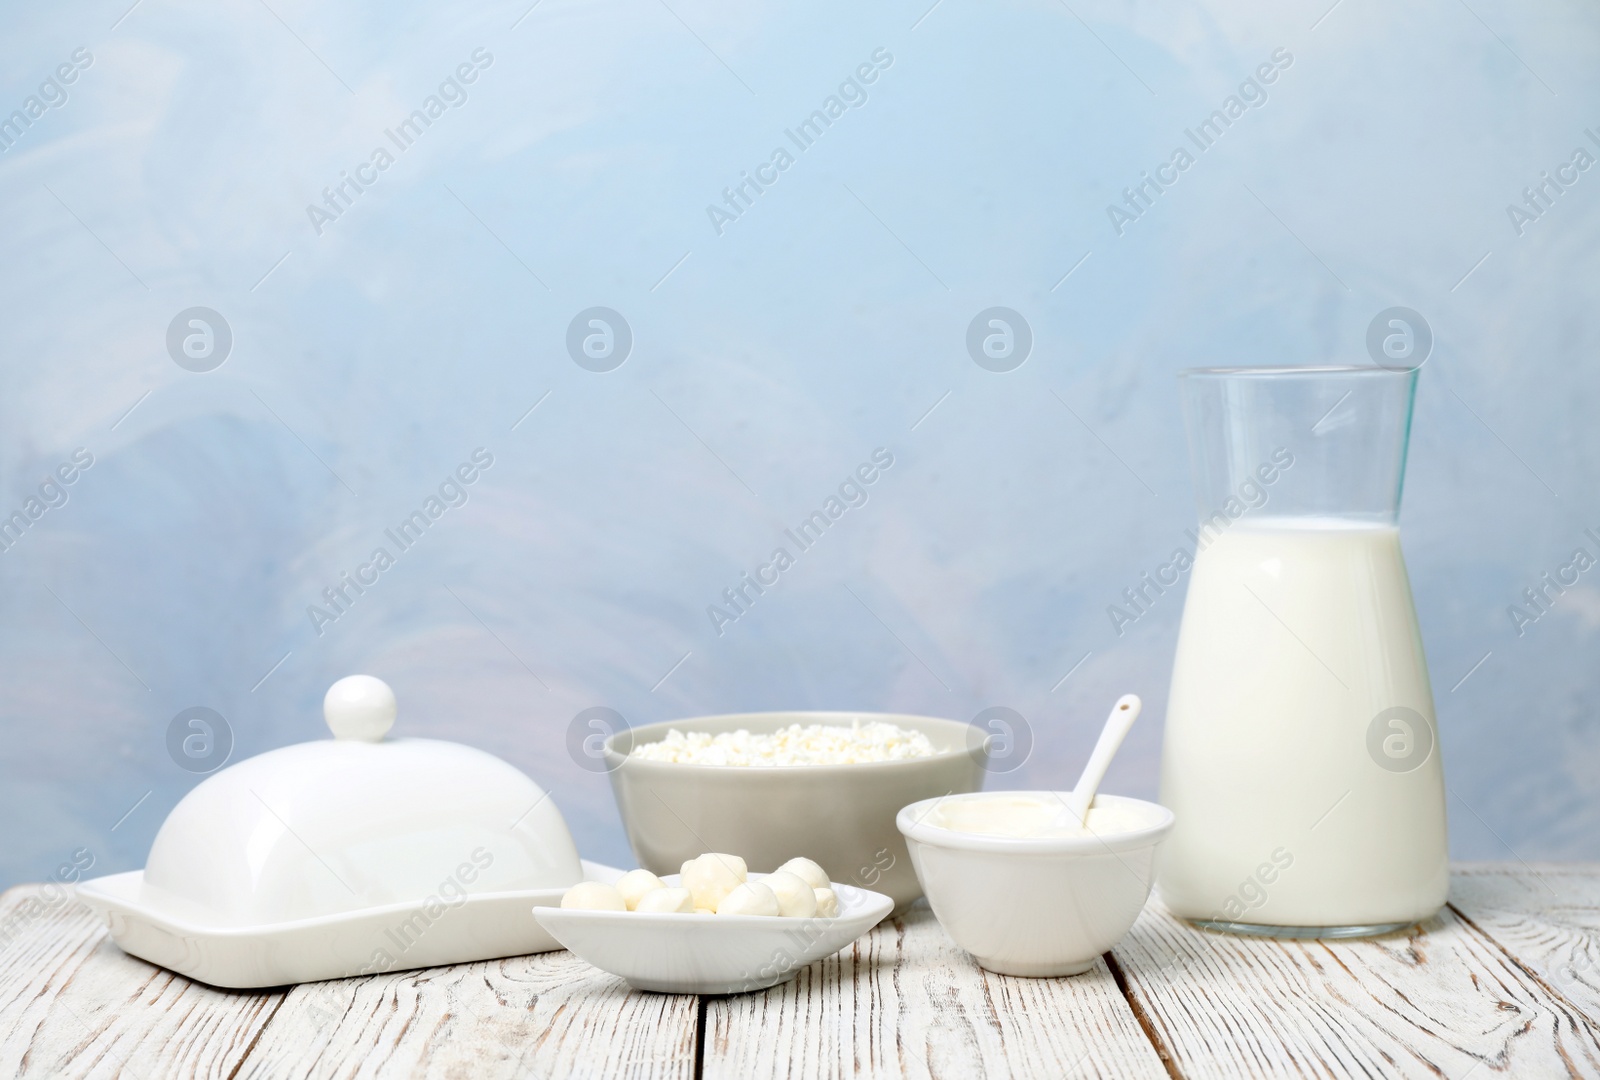 Photo of Different dairy products on wooden table